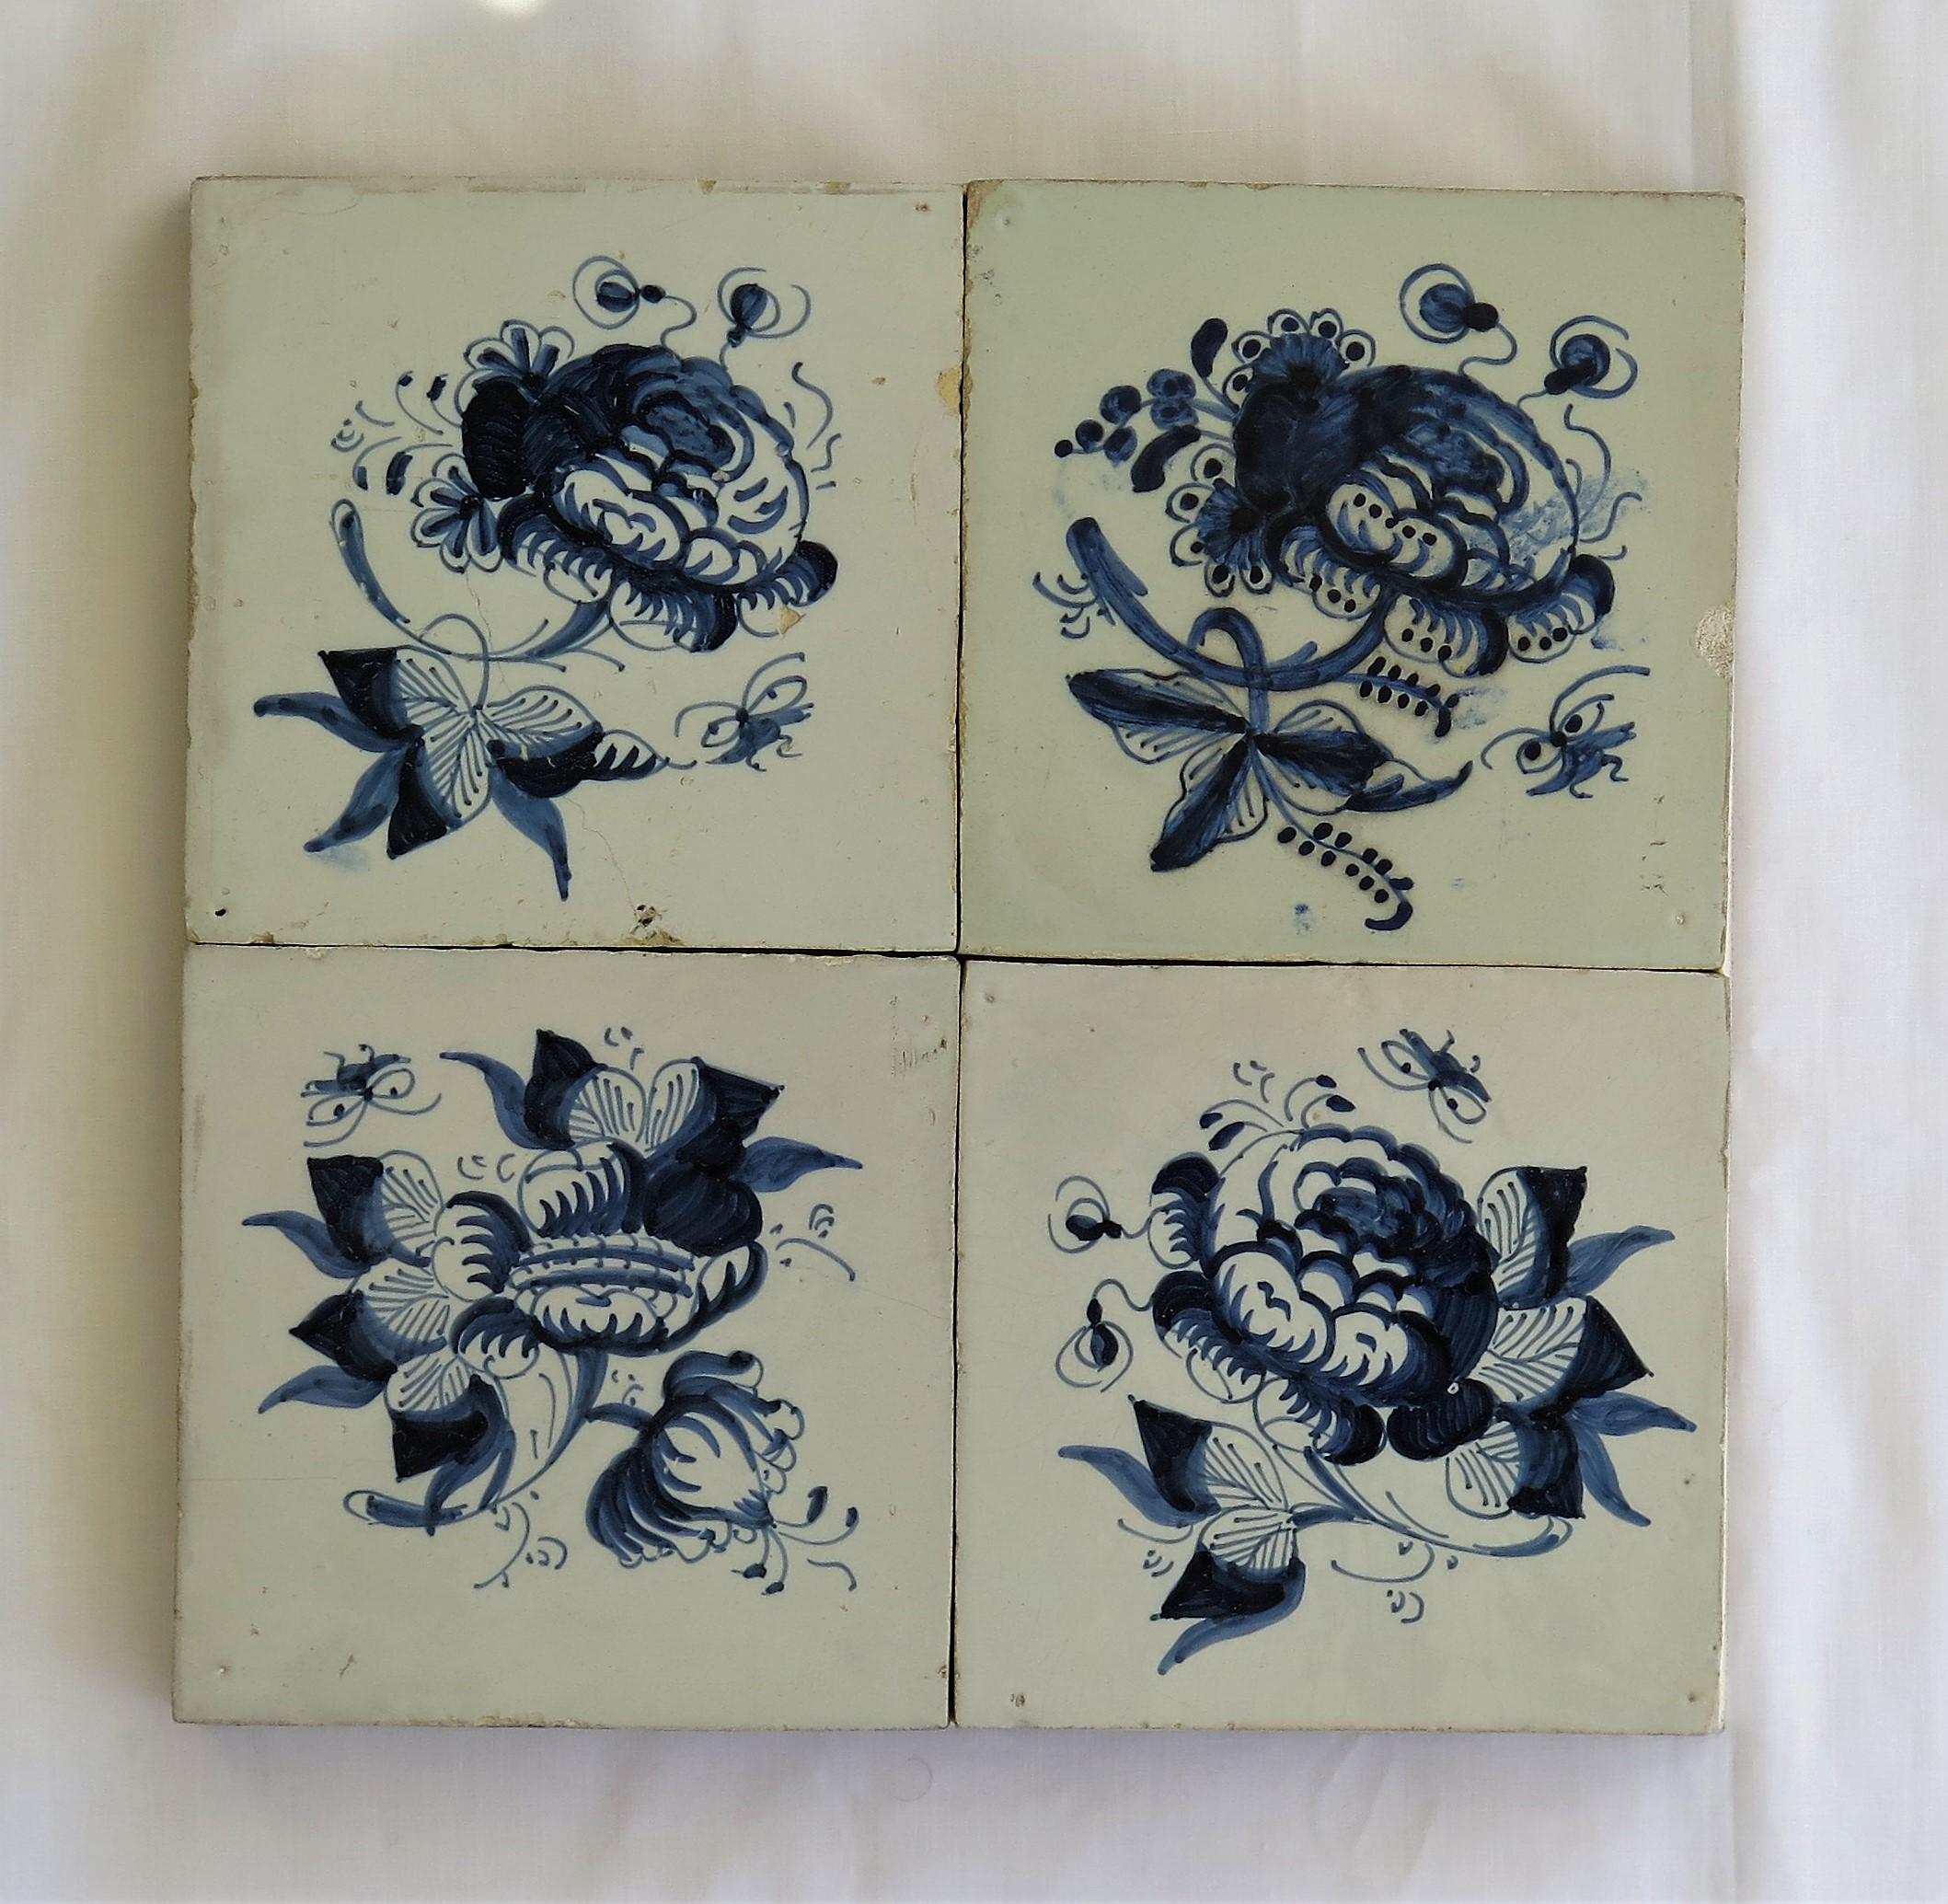 These are Four Delft ceramic wall tiles mounted on a modern wood frame, all with a blue and white hand painted flower pattern, made in the Netherlands during the 17th century, circa 1680.

Each tile is nominally 5 inches square with the display